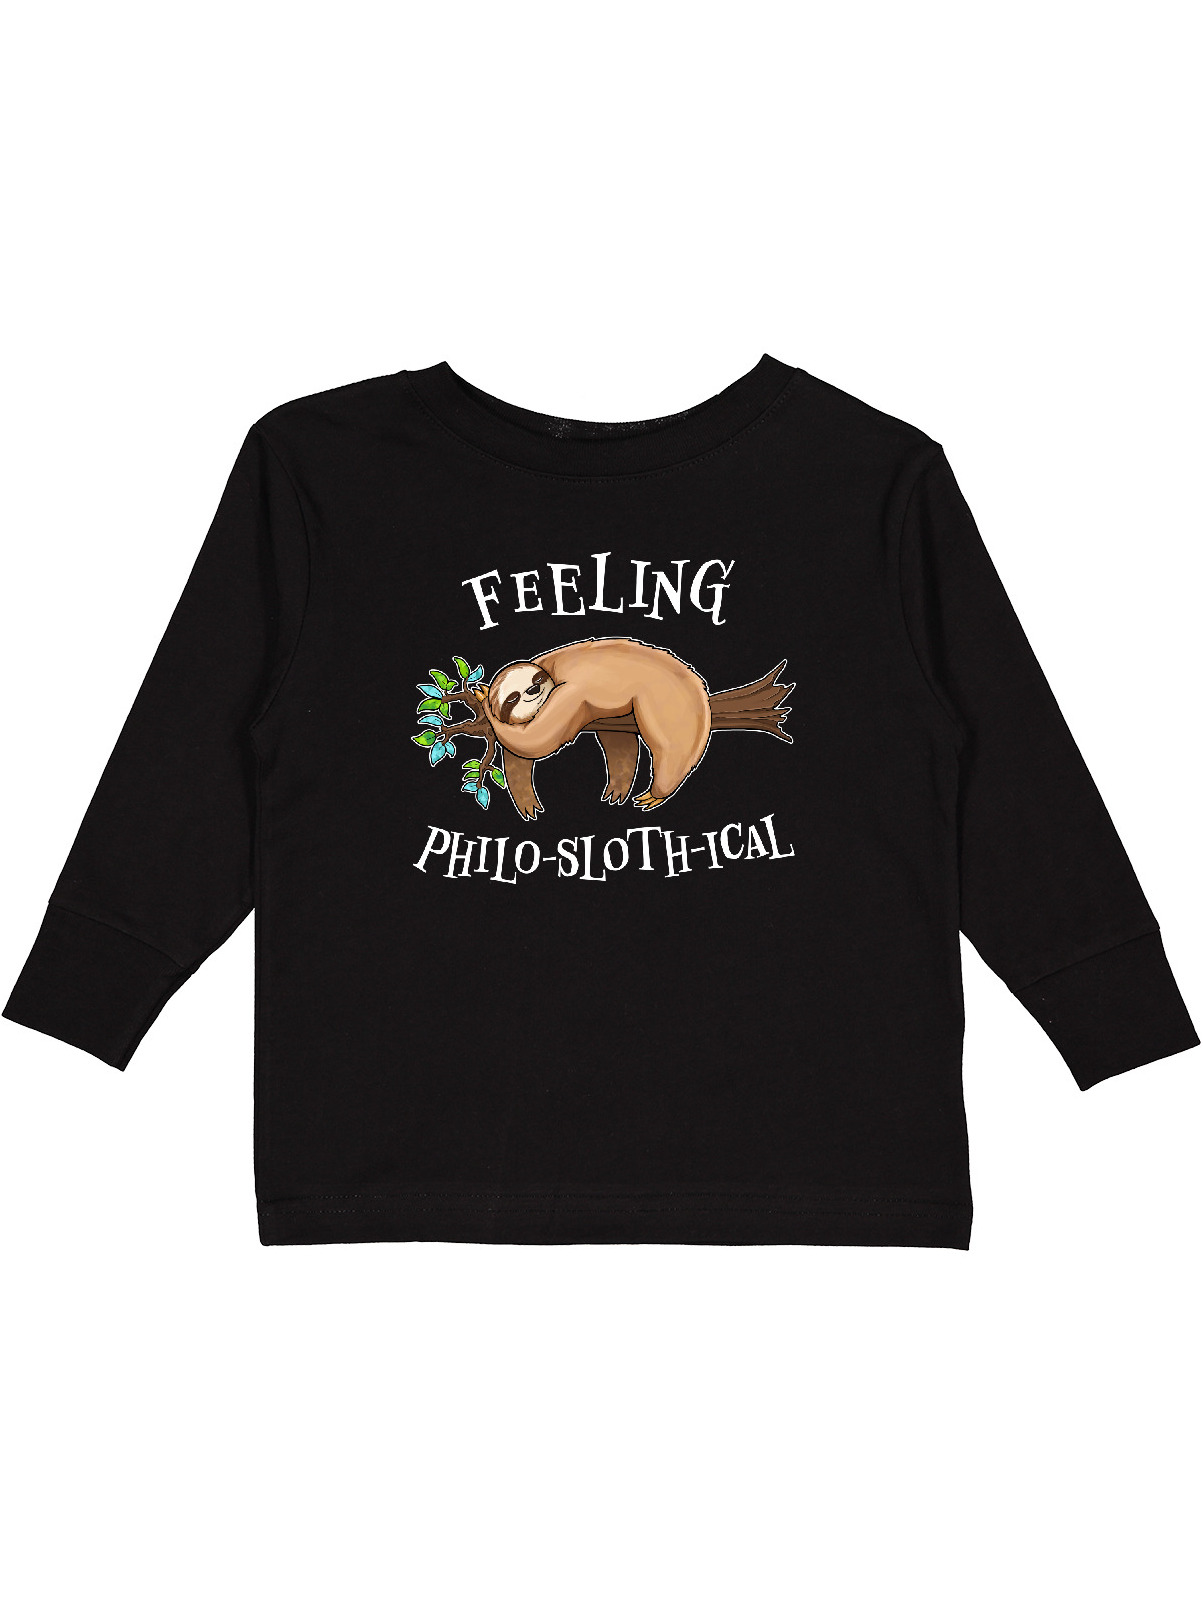 Inktastic Feeling Philo-Sloth-ical- cute and funny sloth on a tree branch Boys or Girls Long Sleeve Toddler T-Shirt - image 1 of 4